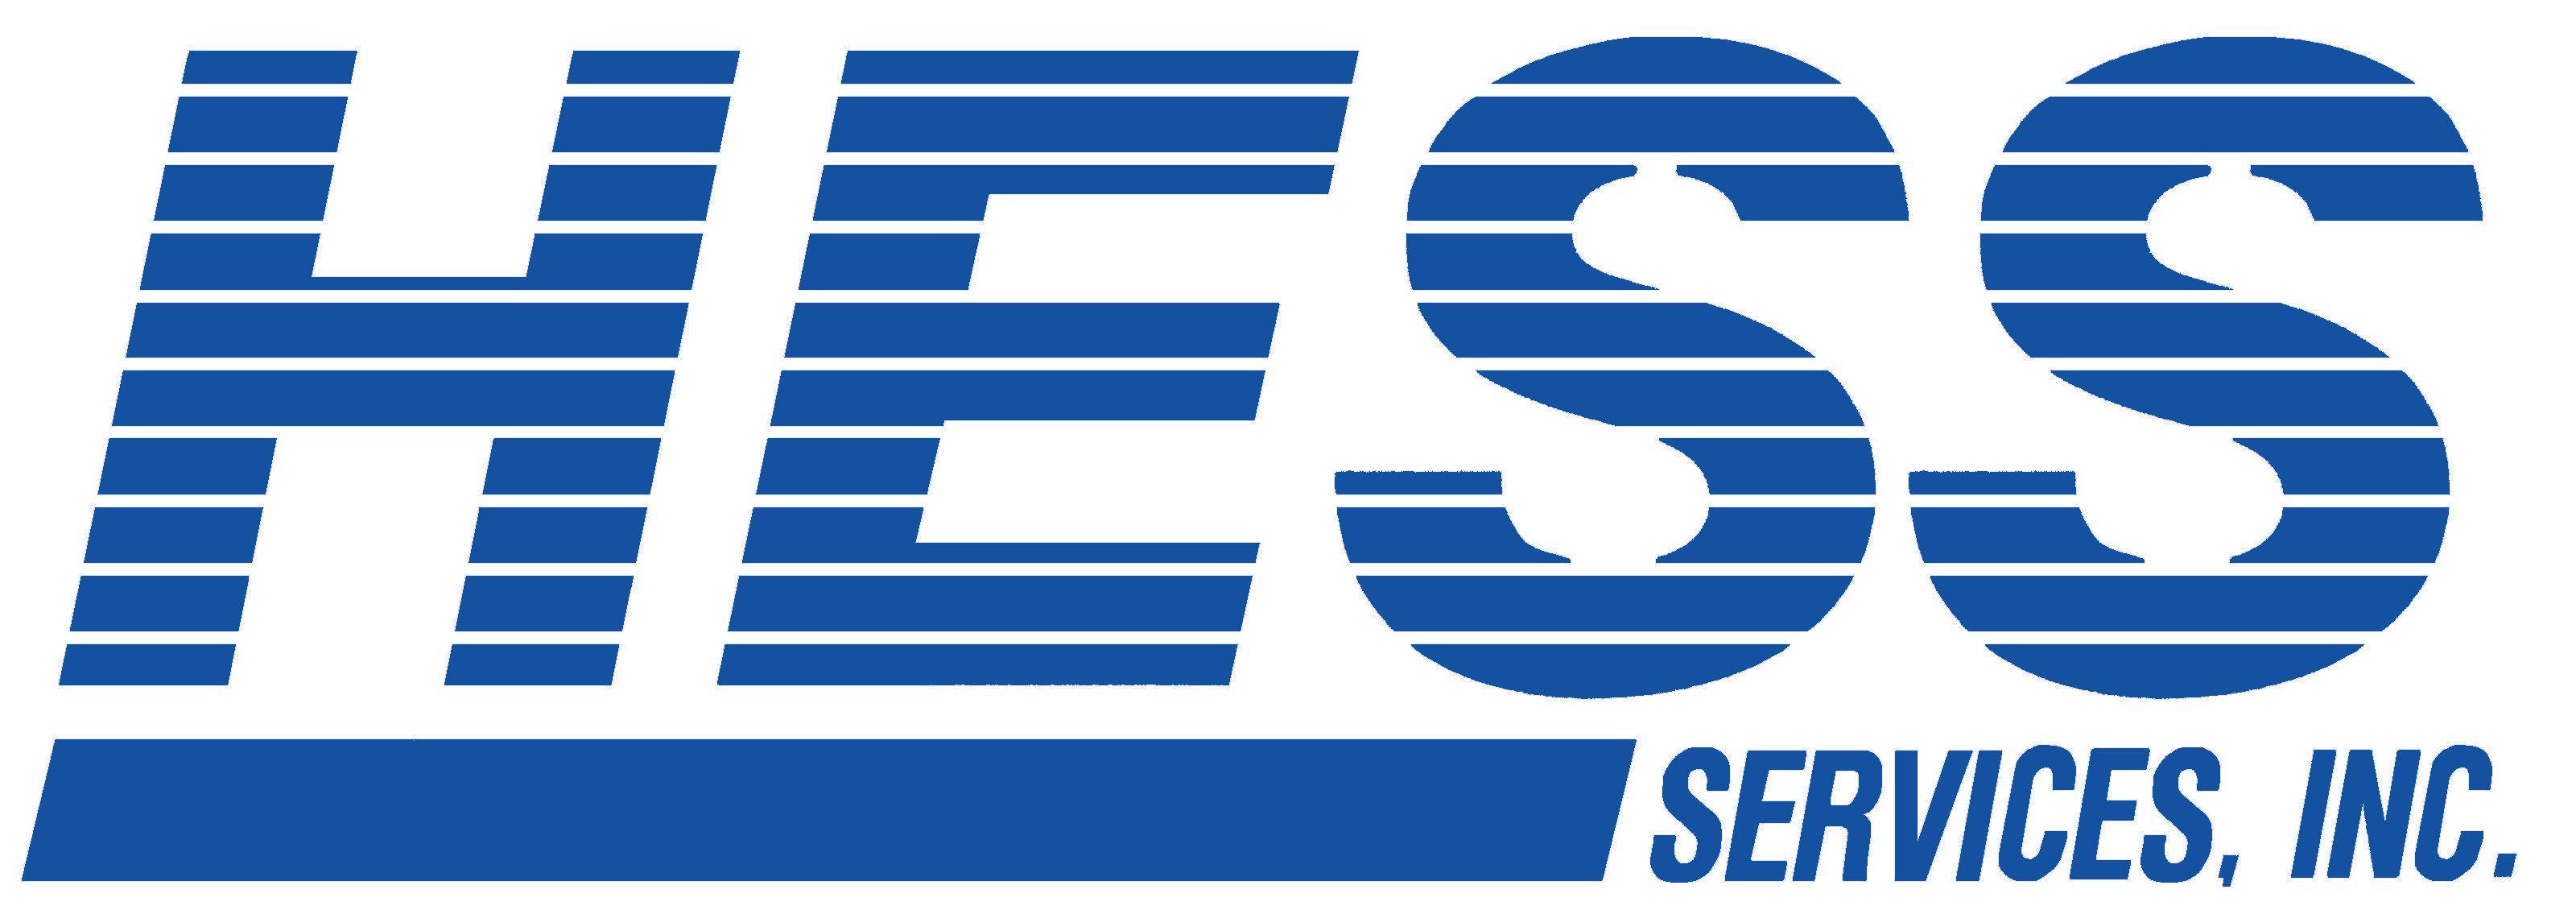 Hess Logo - Hess Services, Inc. – U.S. made quality industrial & oilfield products